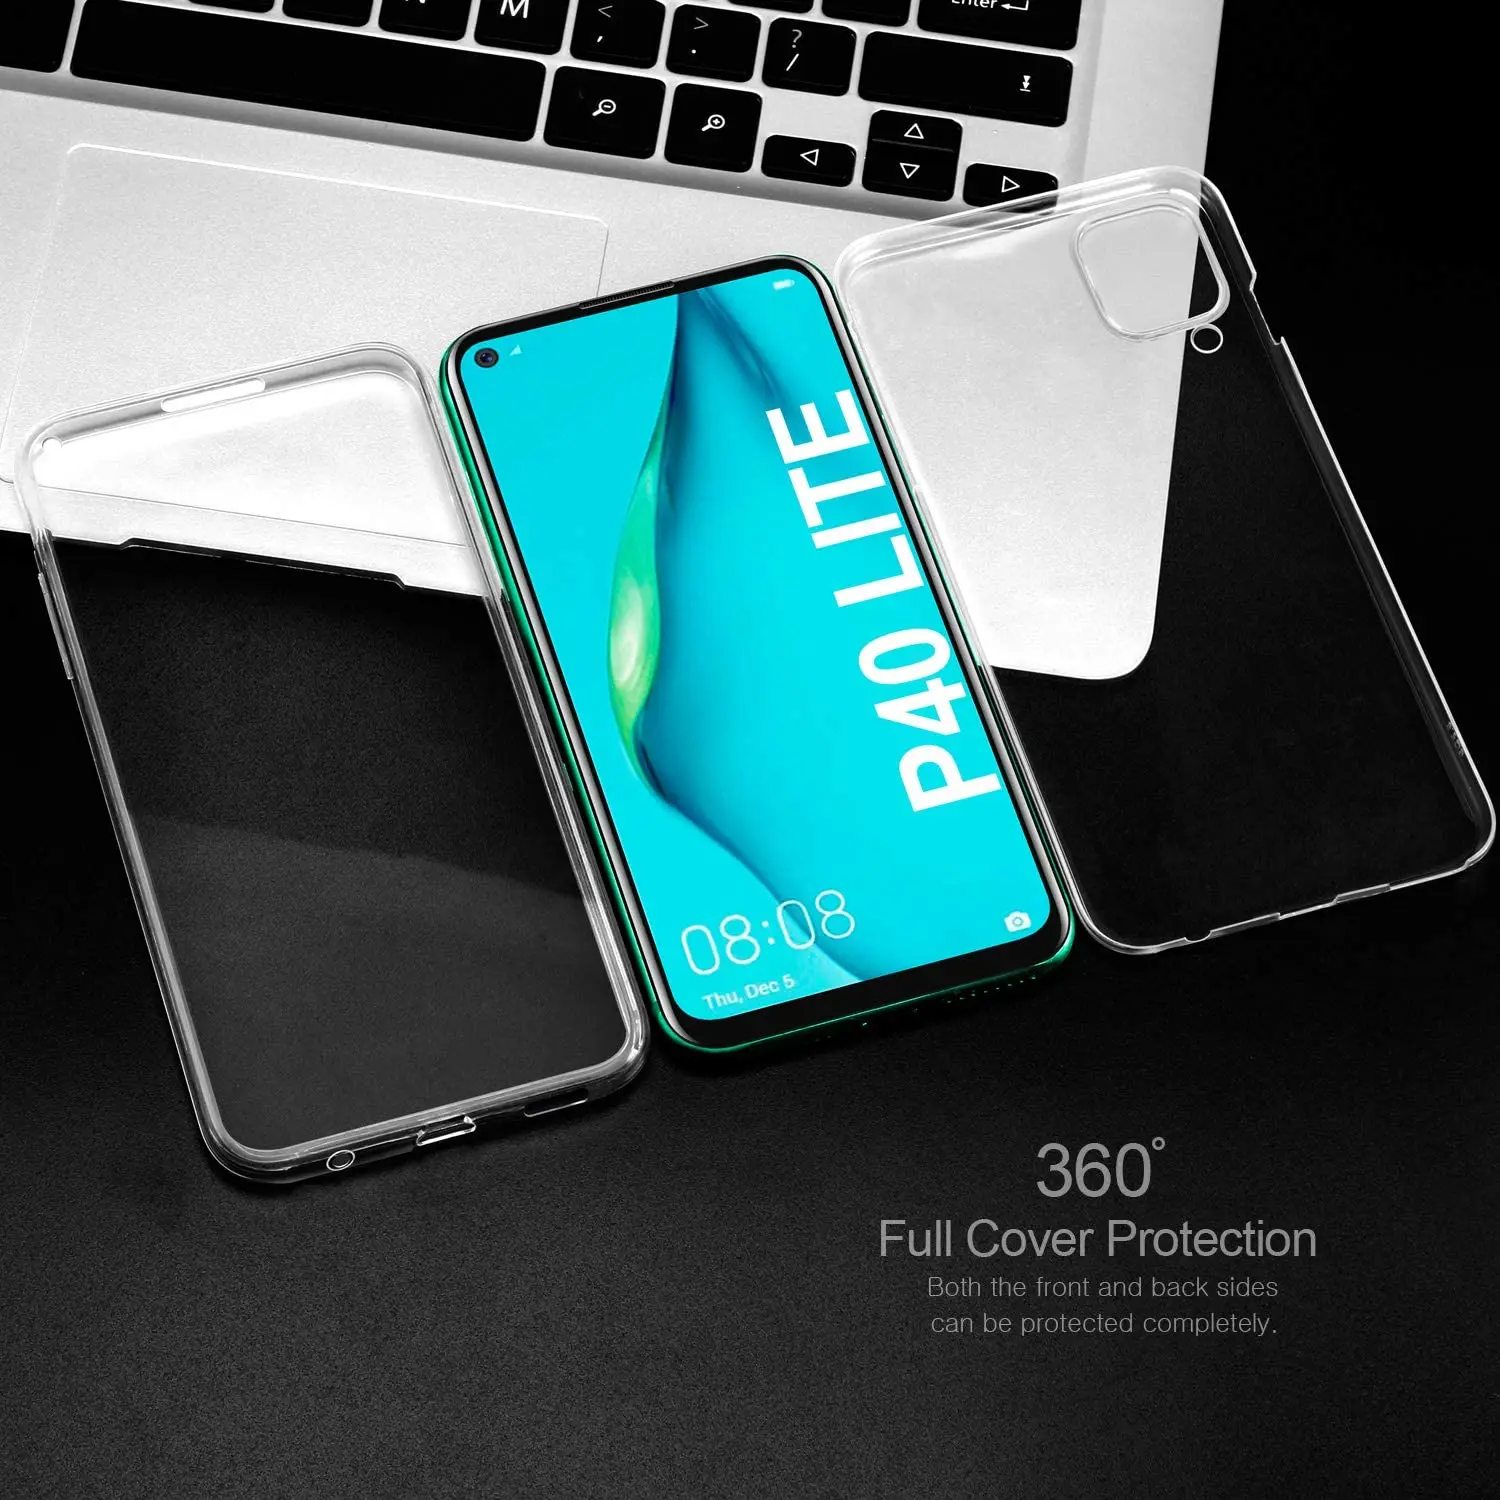 360 Double Cases for Huawei P Smart 2019 P10 P20 Pro P30 P40 Lite E Mate 10 20 Lite Y7p Y5 Y6 2019 Y7 2019 Soft Silicone Cover 